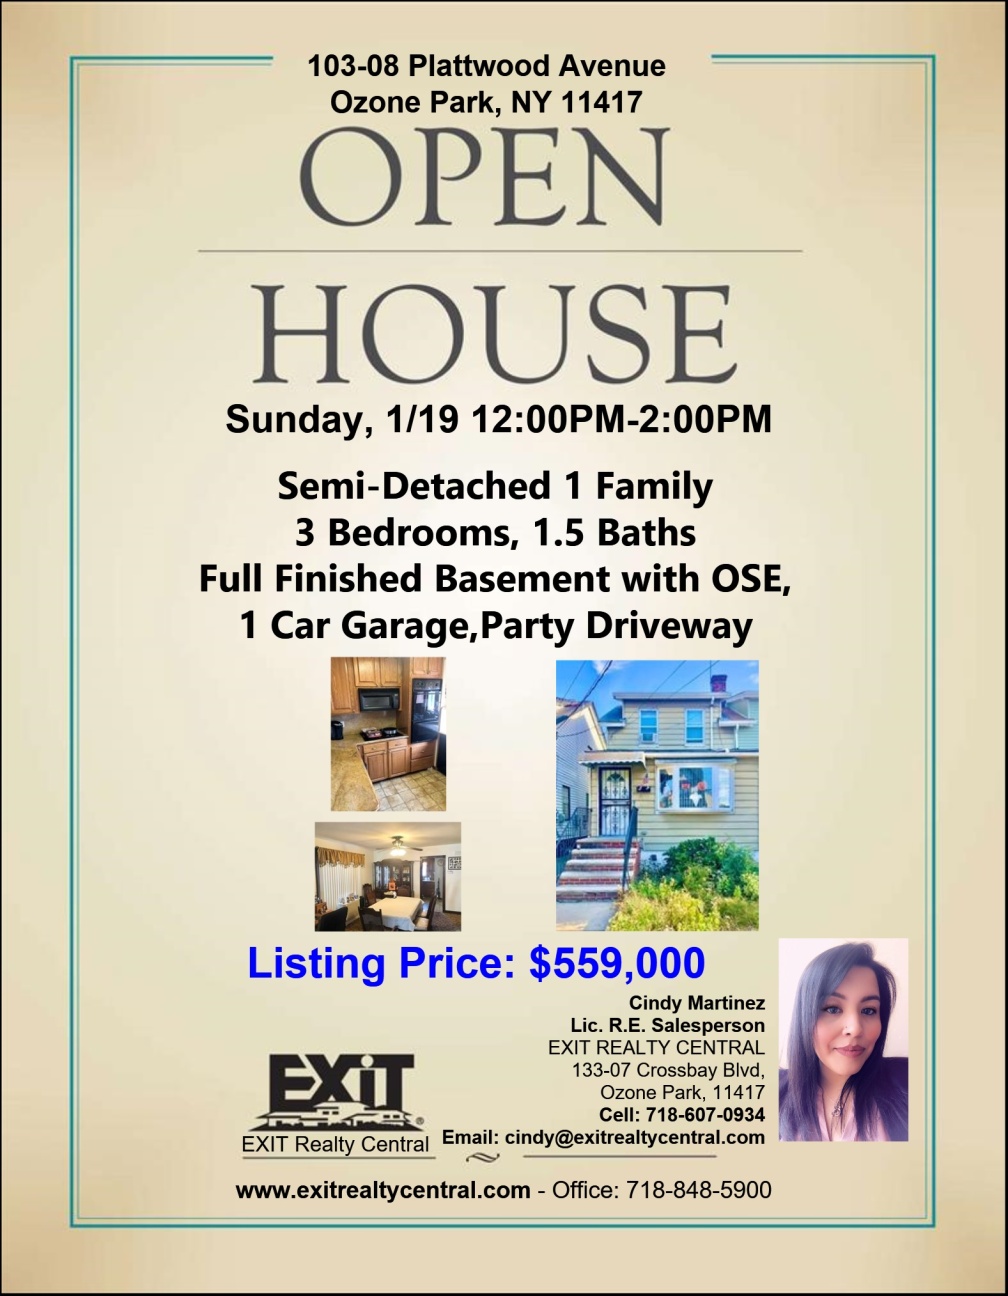 Open House in Ozone Park 1/19 12-2pm